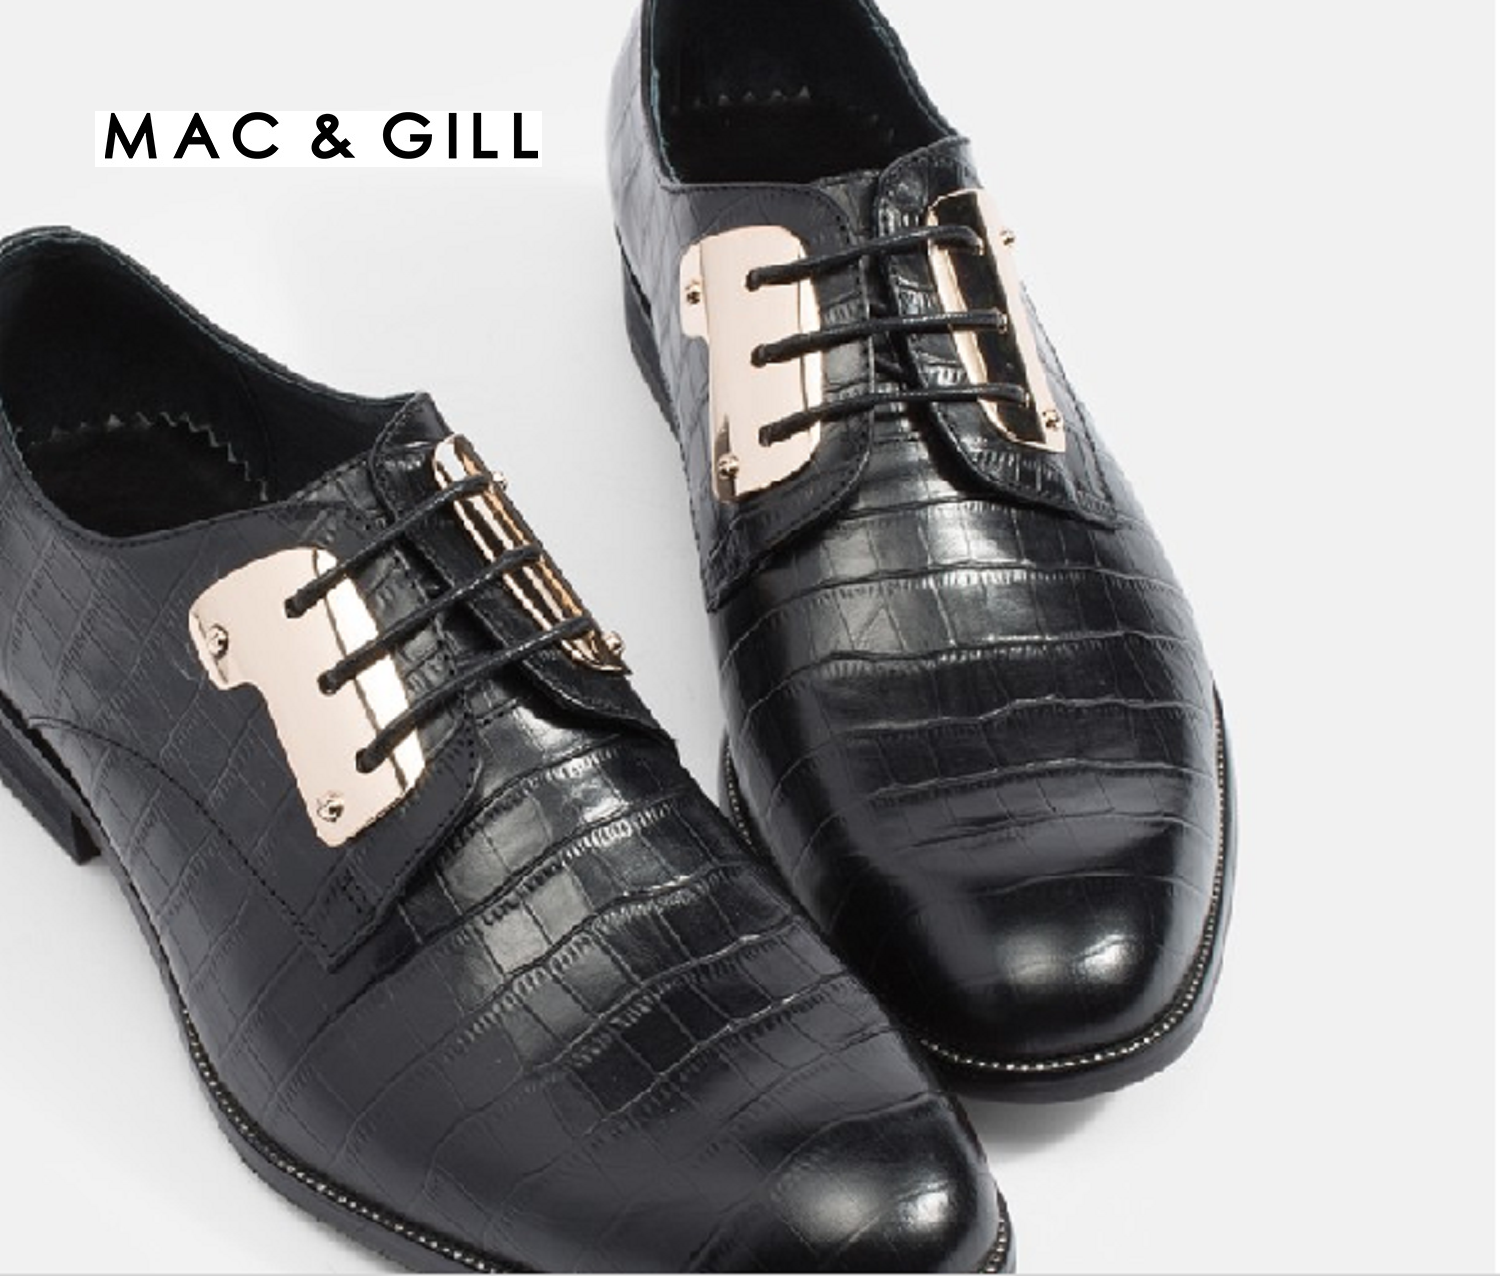 Mac & Gill Croc-Skin Gilded-Steel Lace-Up Shoes